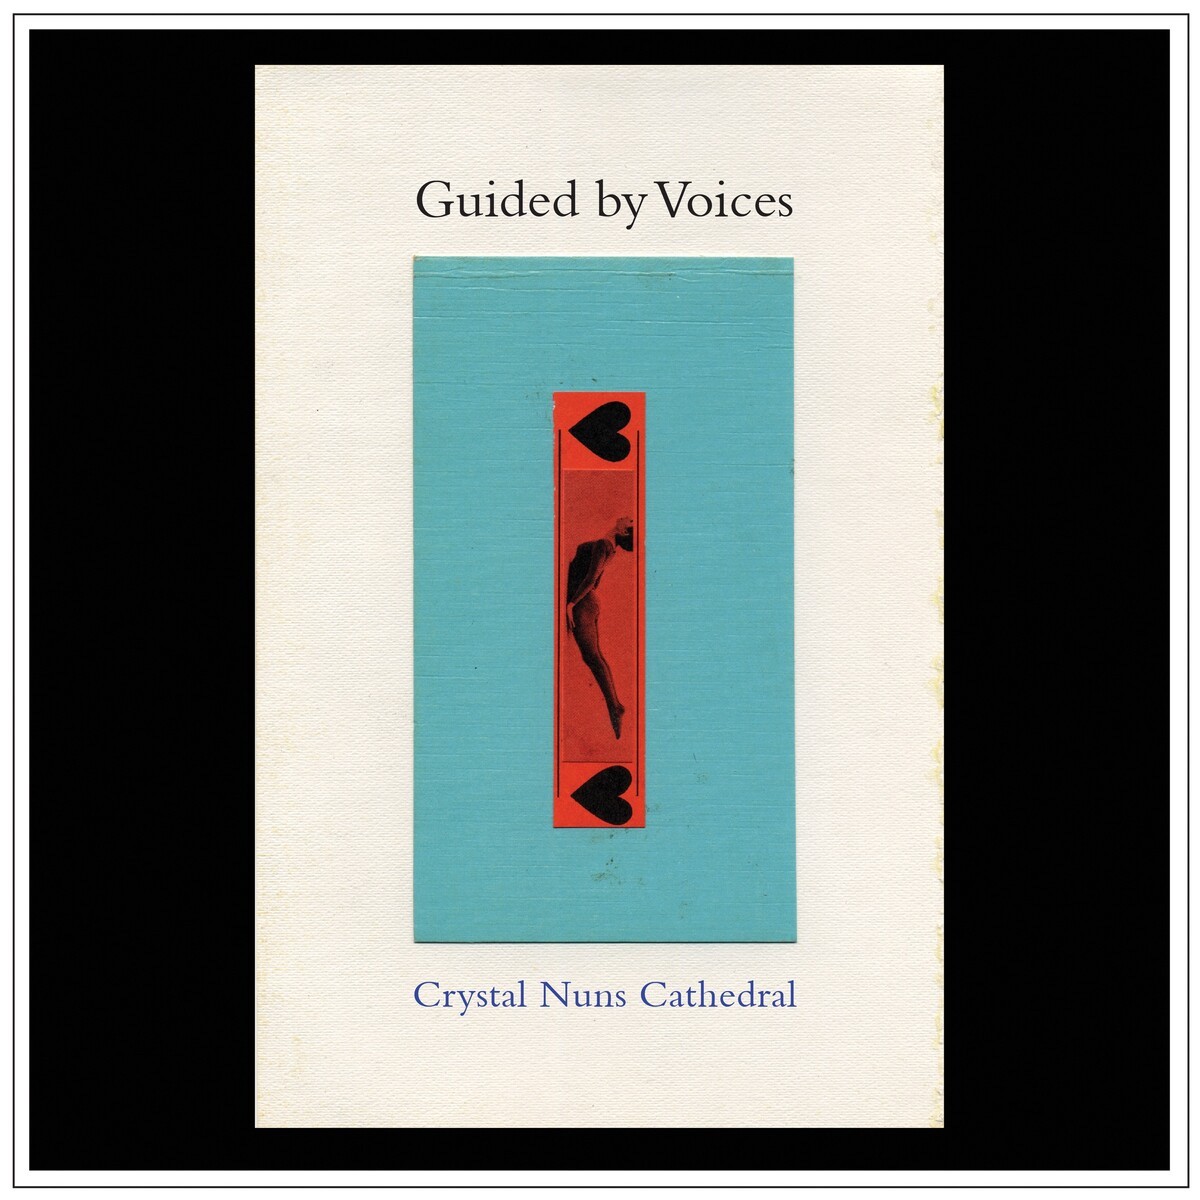 Guided by Voices, Crystal Nuns Cathedral